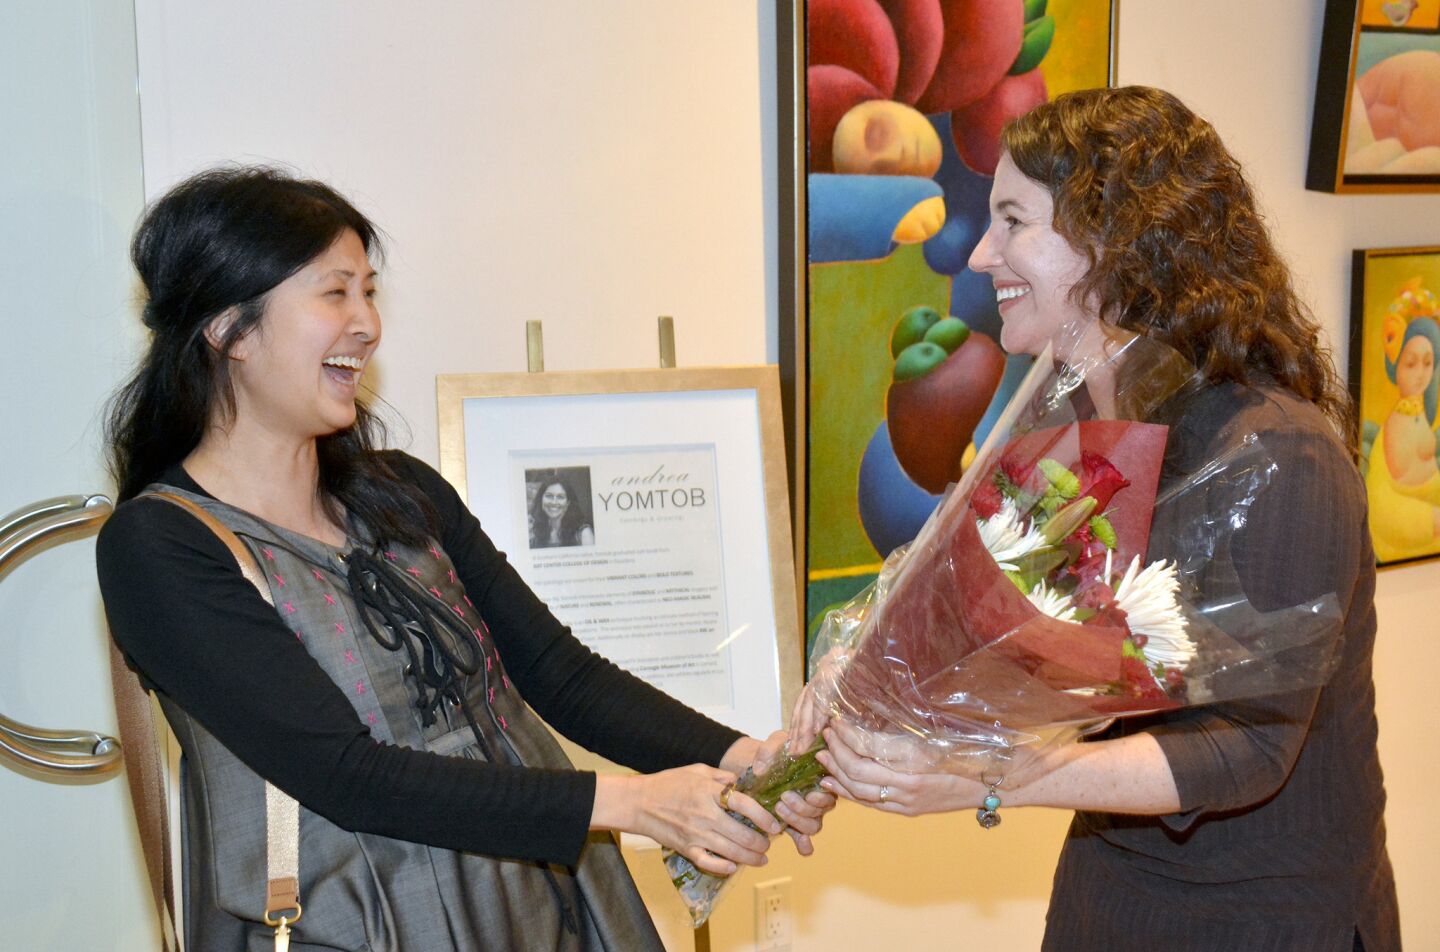 Artist Andrea Yomtob, left, is congratulated by her former Nickelodeon colleague Amy Casler during the Friday evening opening of her exhibit at Gallery 839.